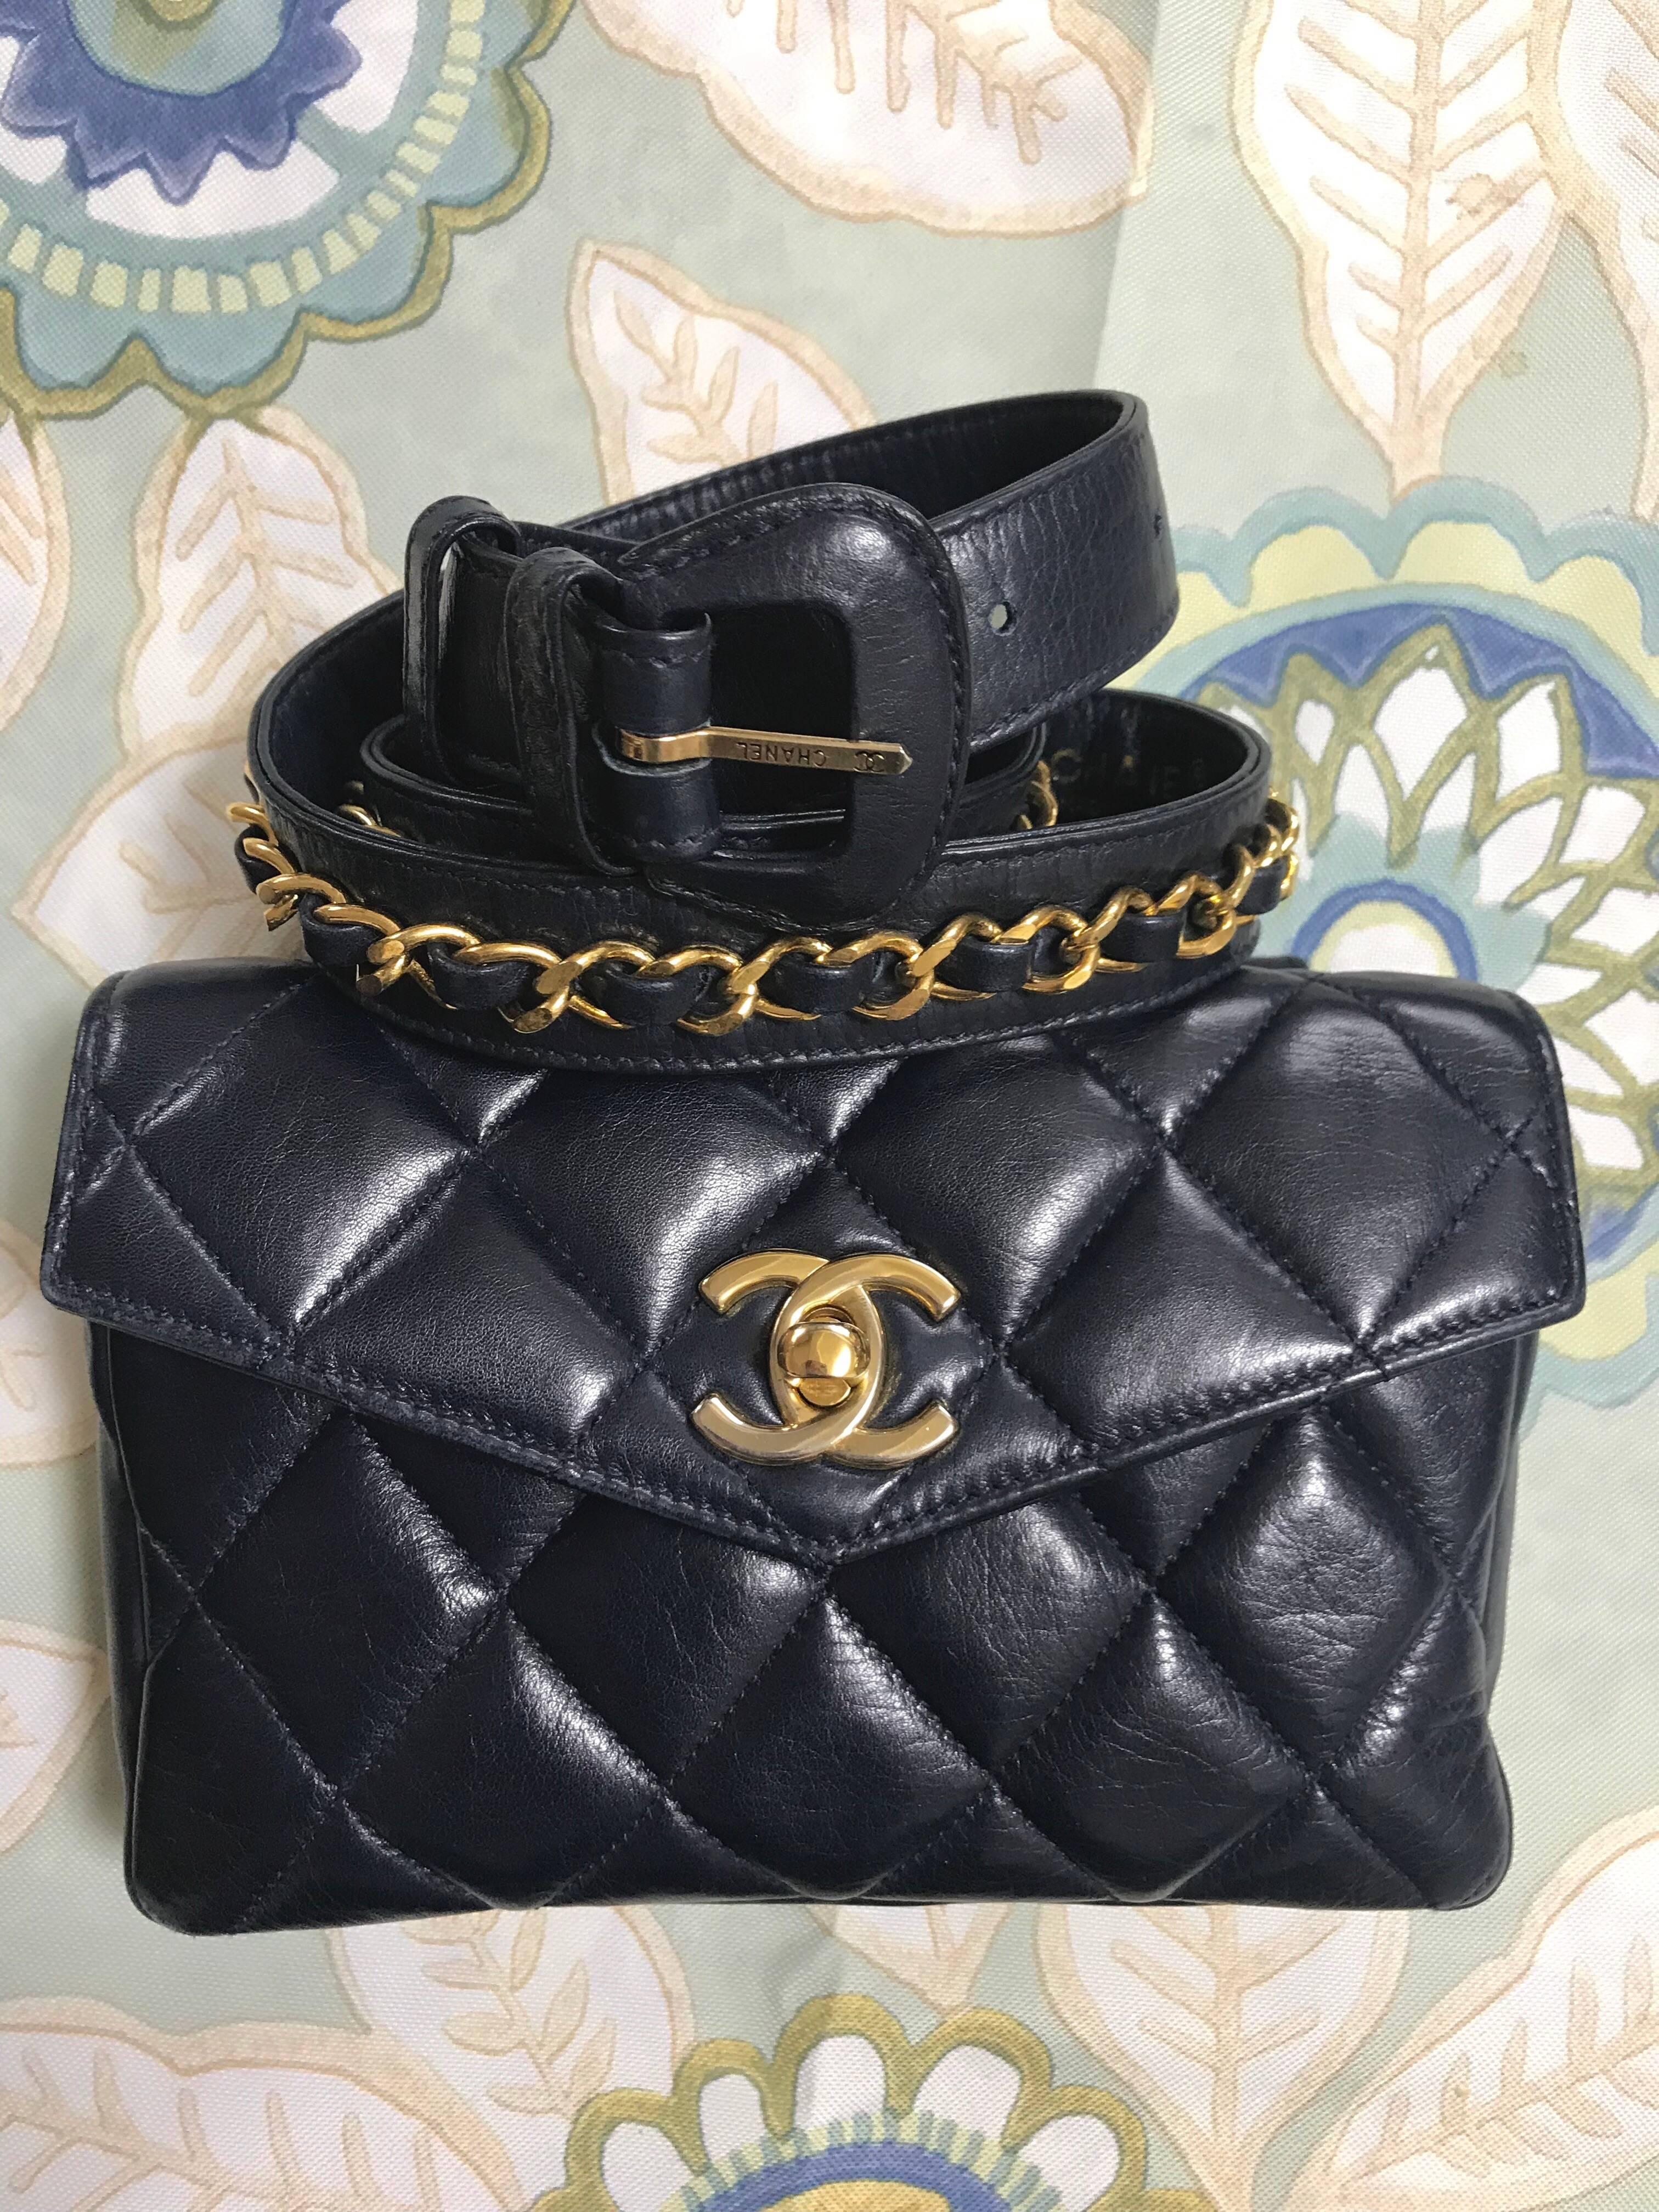 1980s. Vintage CHANEL navy lamb leather waist purse, fanny pack with golden chain belt and golden CC closure hock. 
Belt size  27" through 29.5" (69~75cm)

Vintage CHANEL navy lamb leather waist purse, fanny pack with golden chain belt and